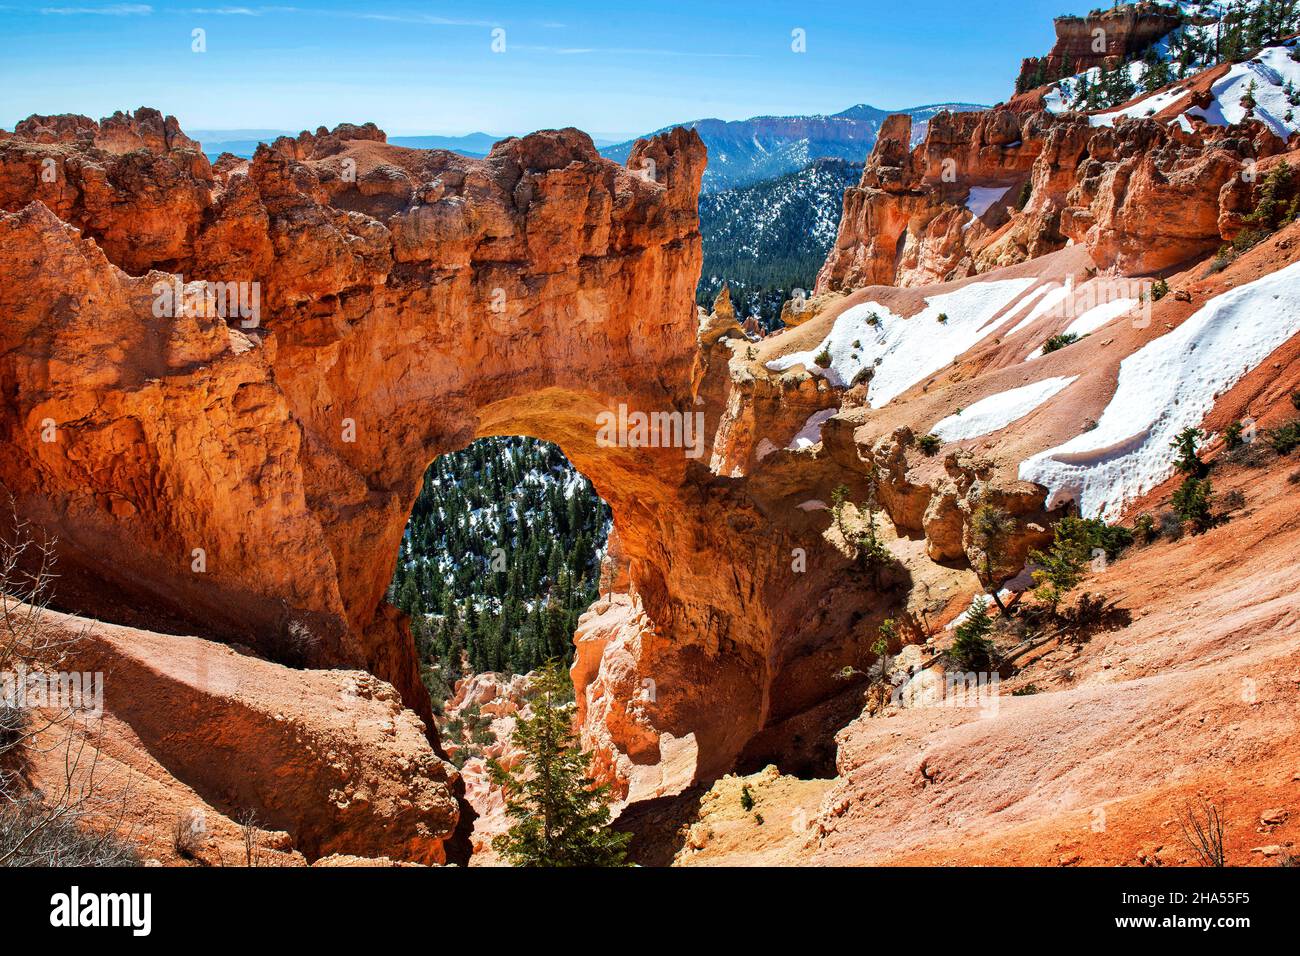 Natural Bridge is one of several natural arches in Bryce Canyon and creates a beautiful scene at this viewpoint, Bryce Canyon National Park, Utah Stock Photo